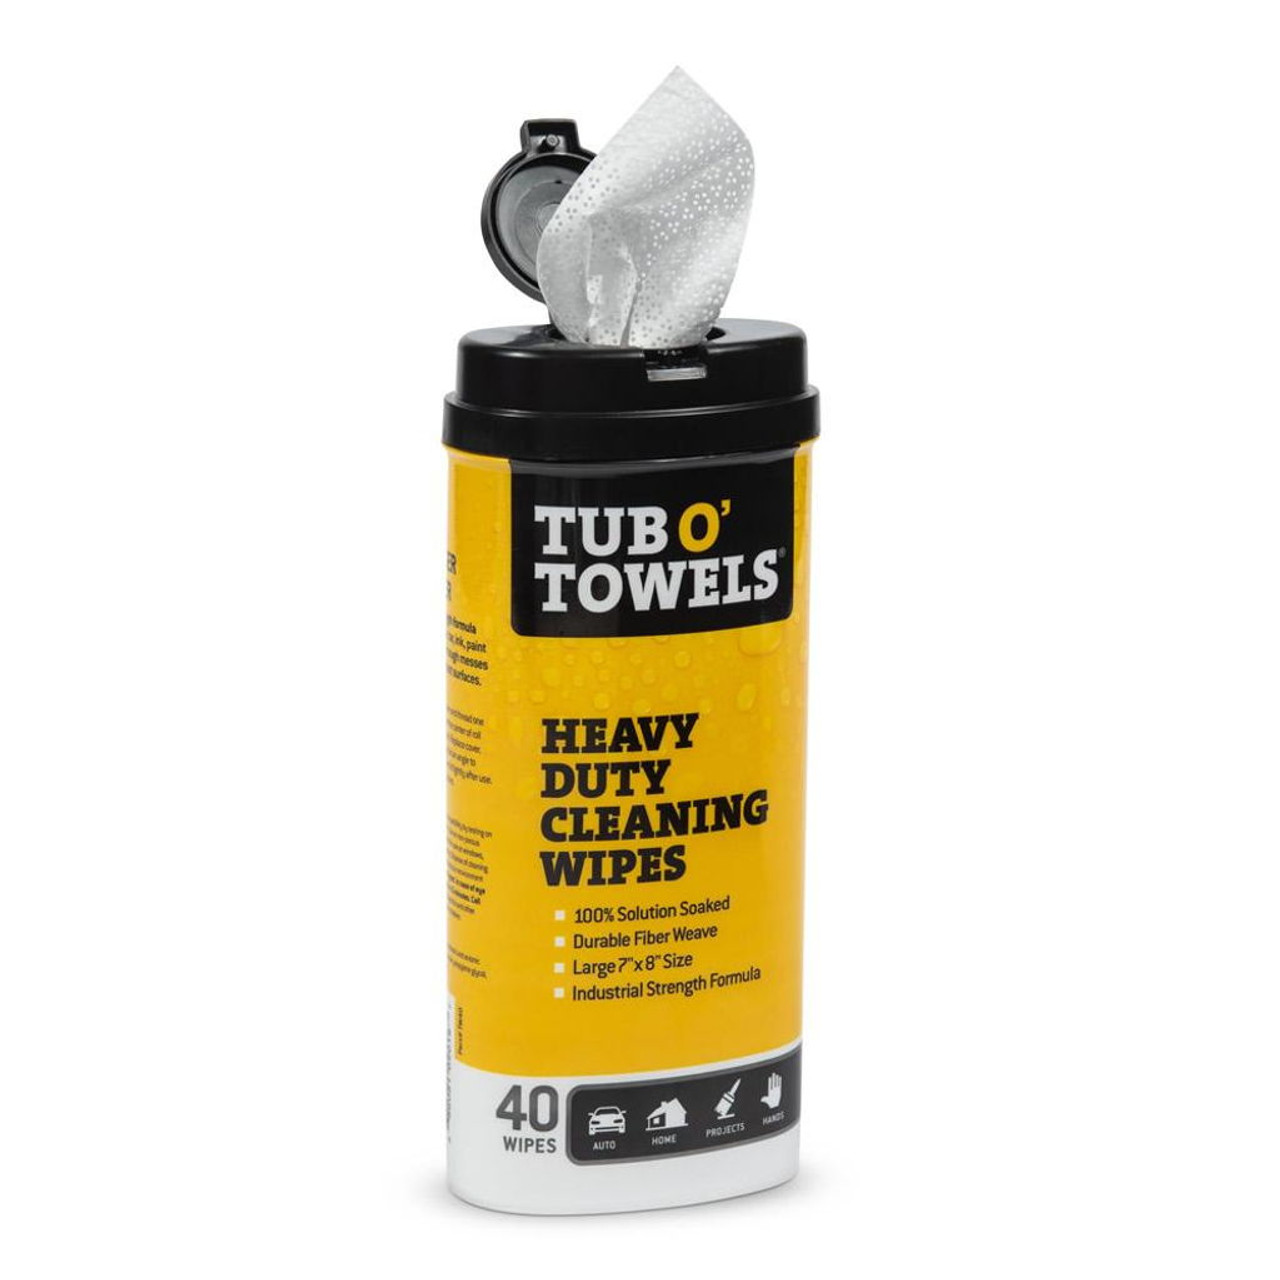 Tub O Towels Heavy Duty Cleaning Wipes 40qty TW40 from Tub O Towels - Acme  Tools